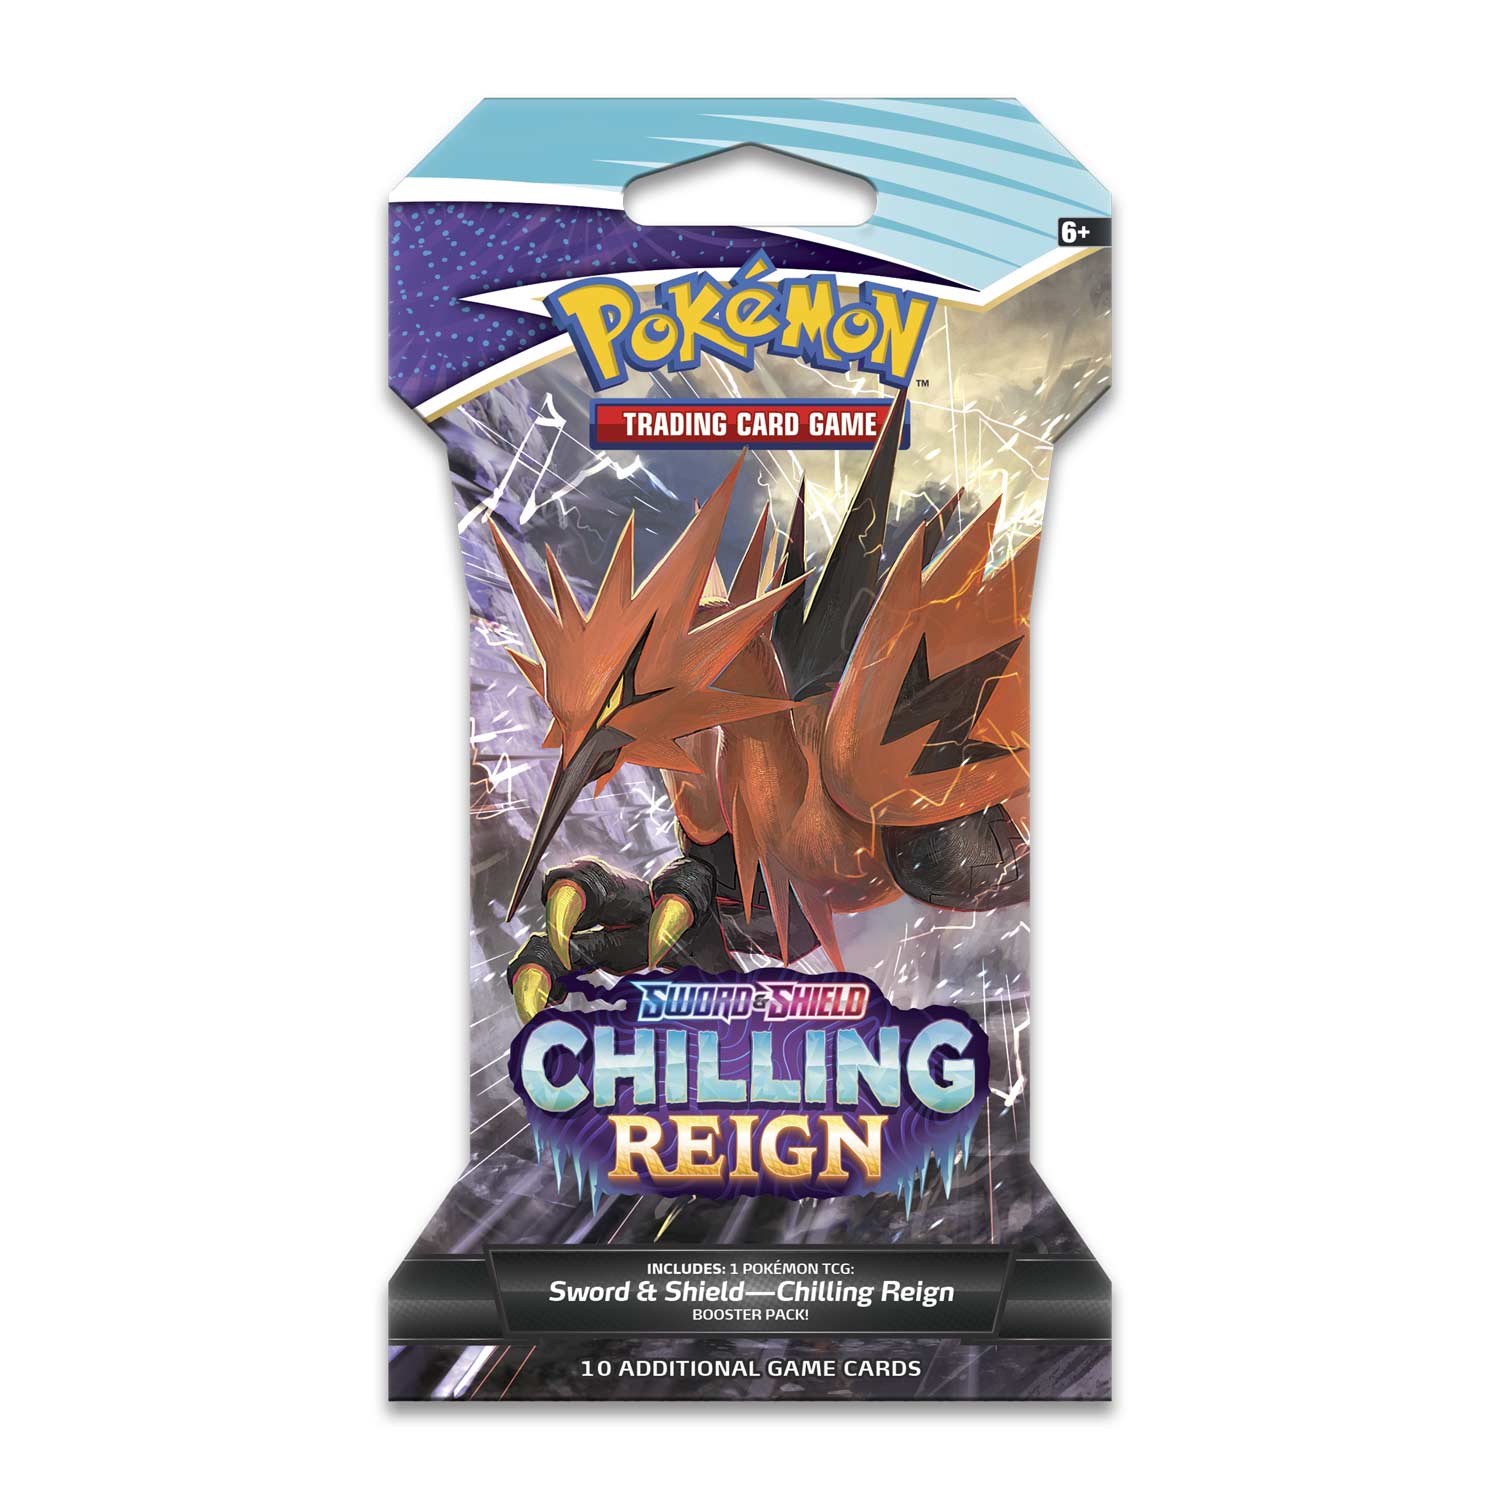 Pokémon - Chilling Reign Sleeved Booster